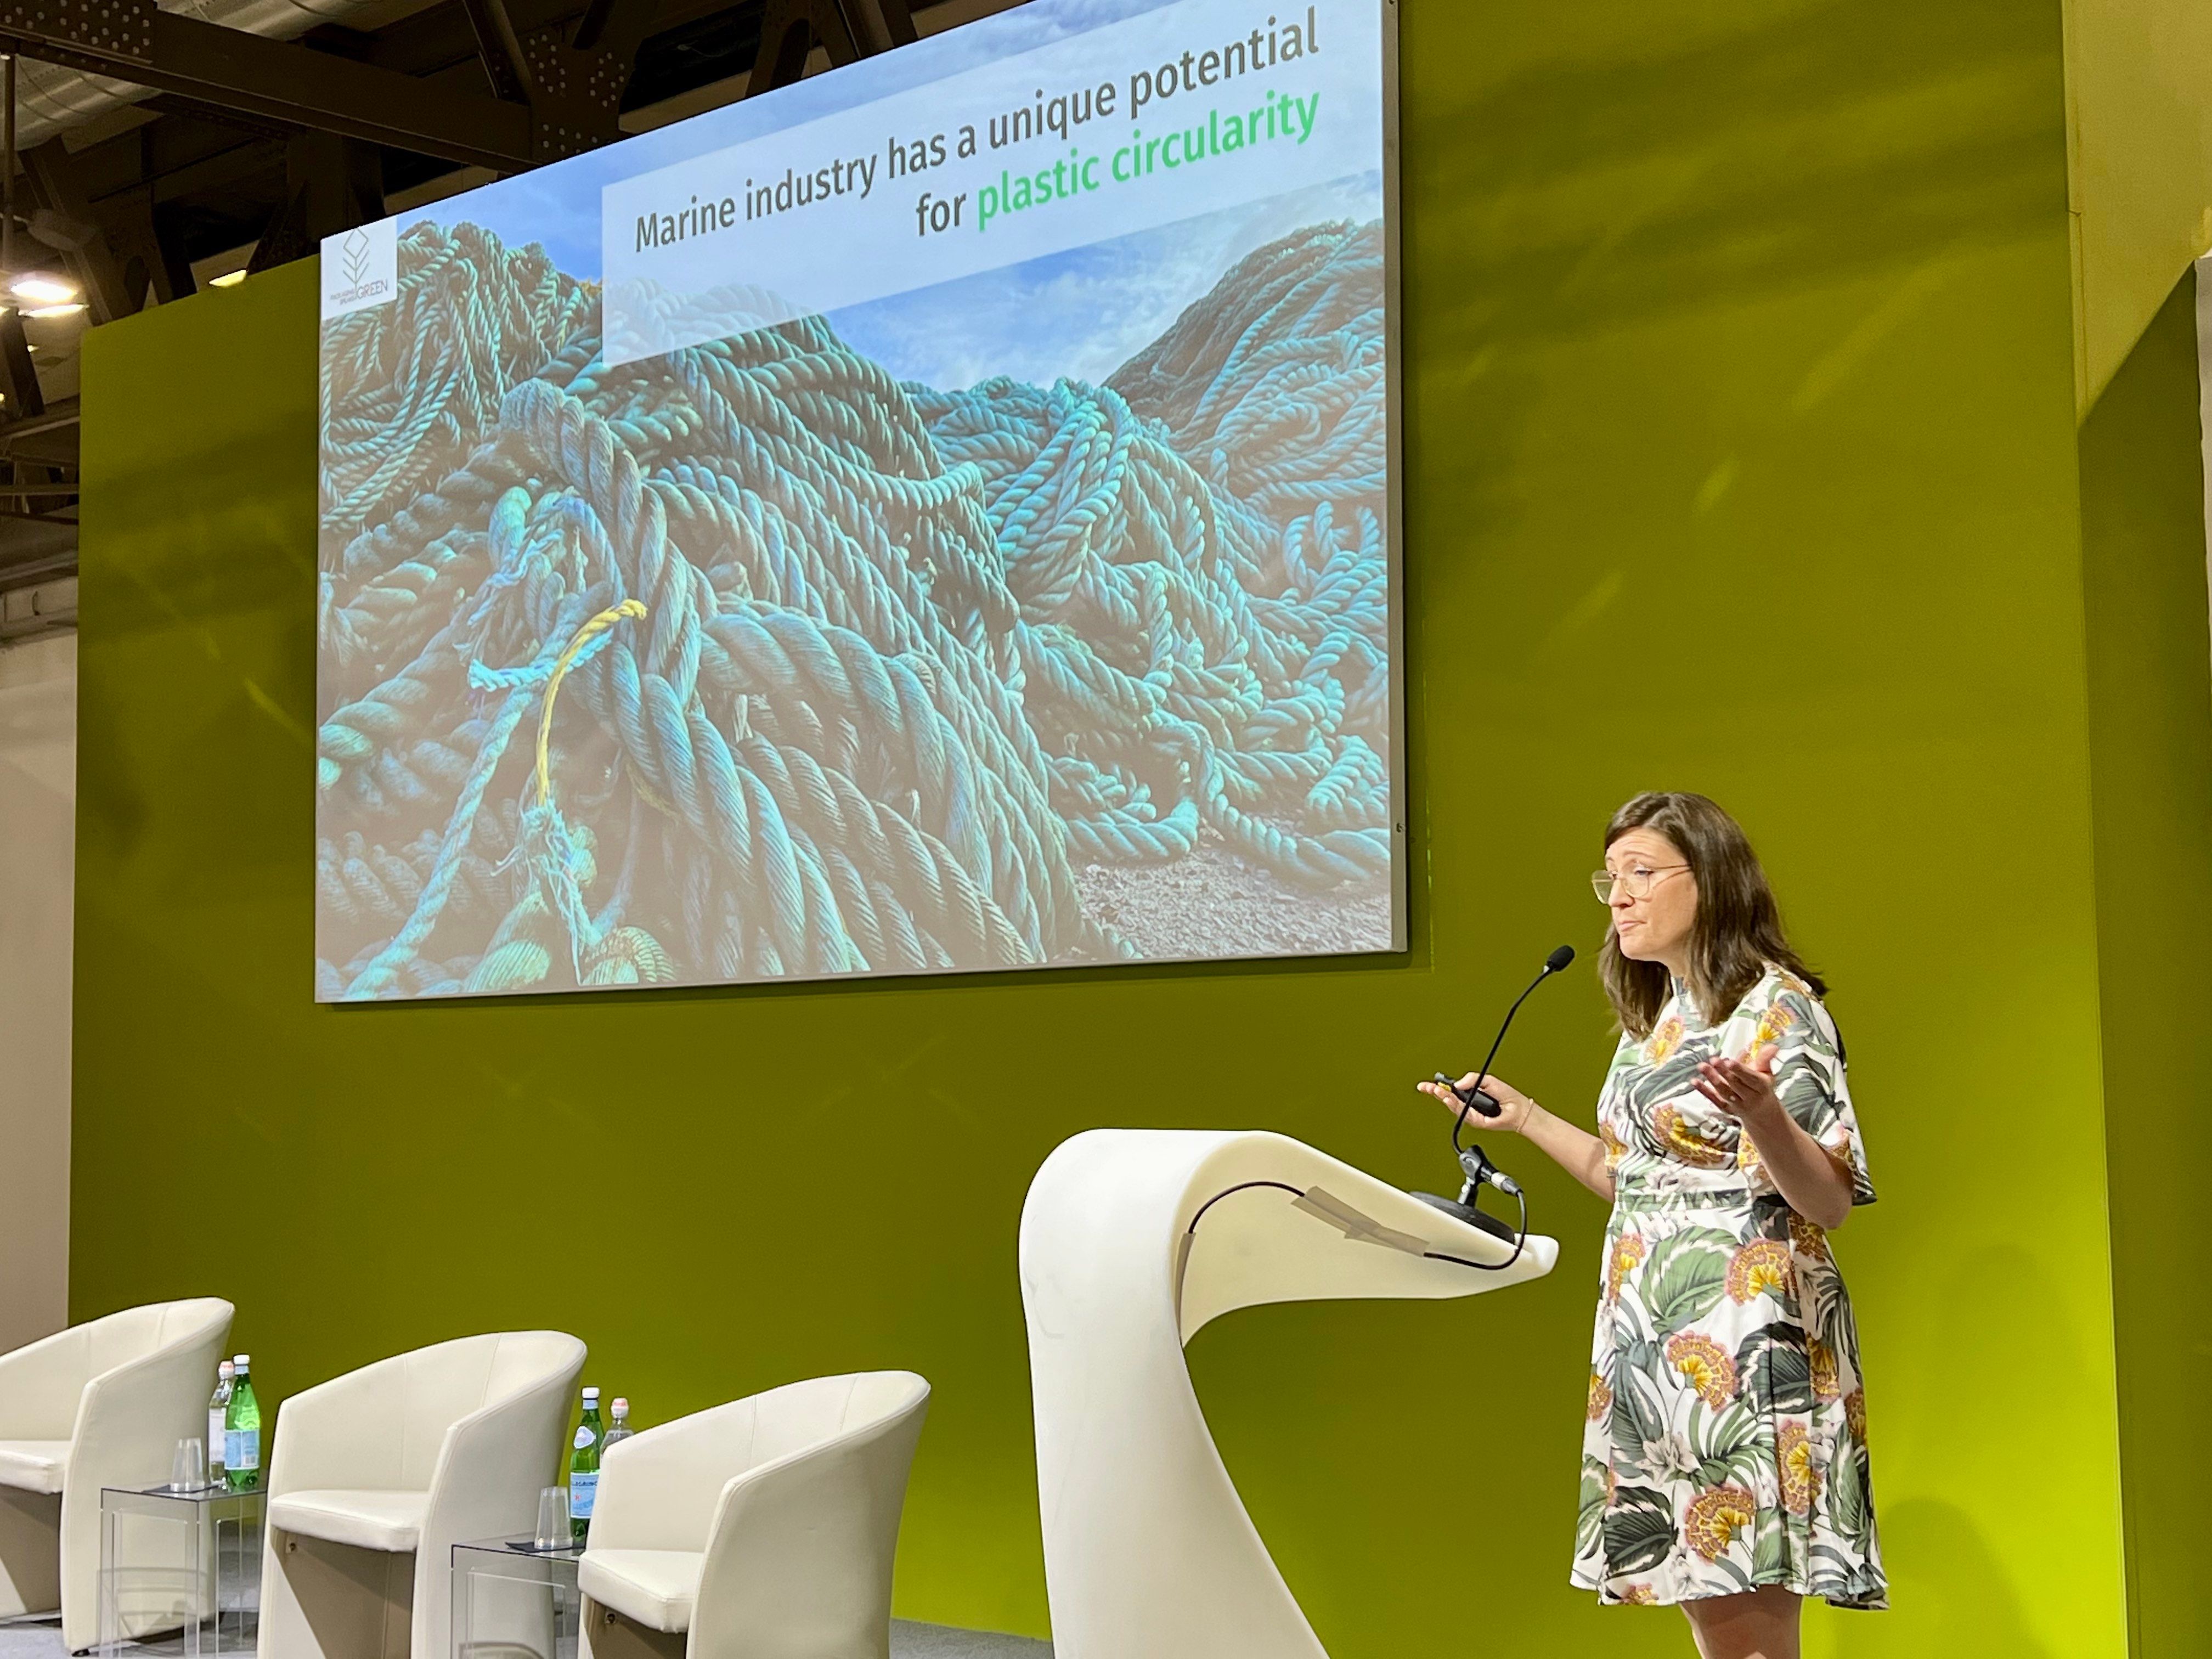 Susie Jahren, Chief Circular Product Officer at AION, presenting at the Greenplast conference